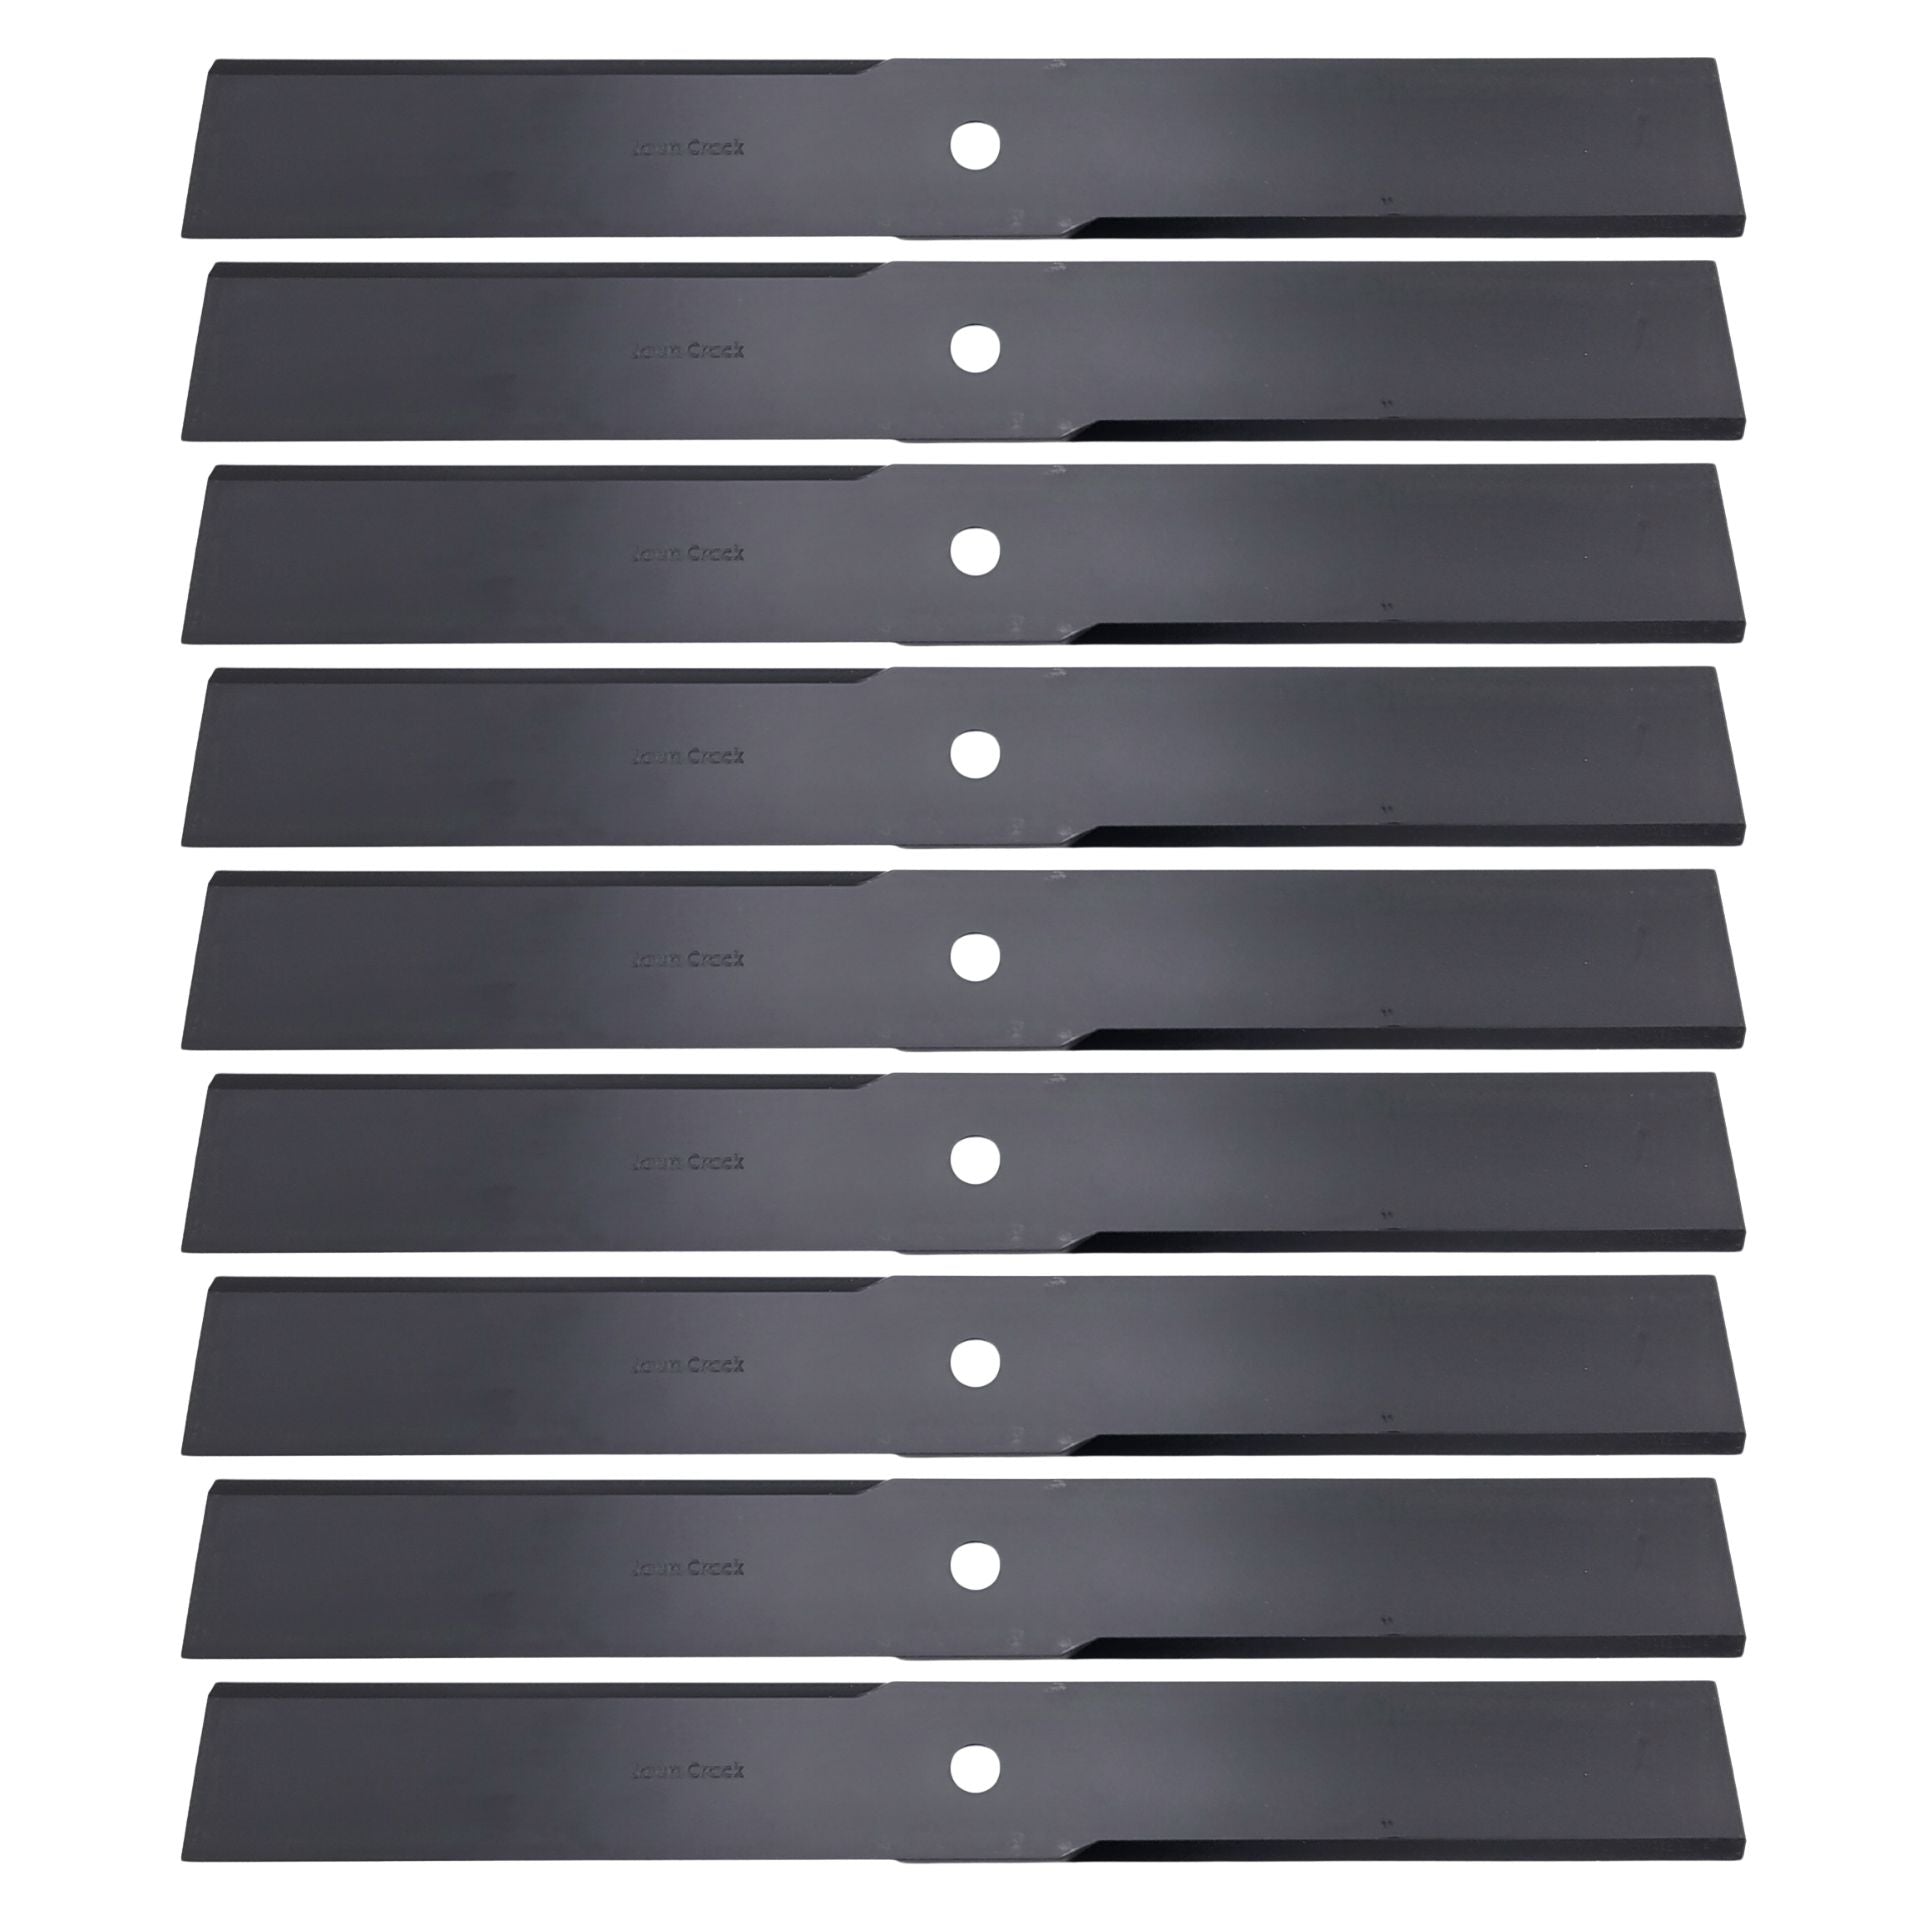 9-Pack of flat sand blades for 60 inch lawn mowers